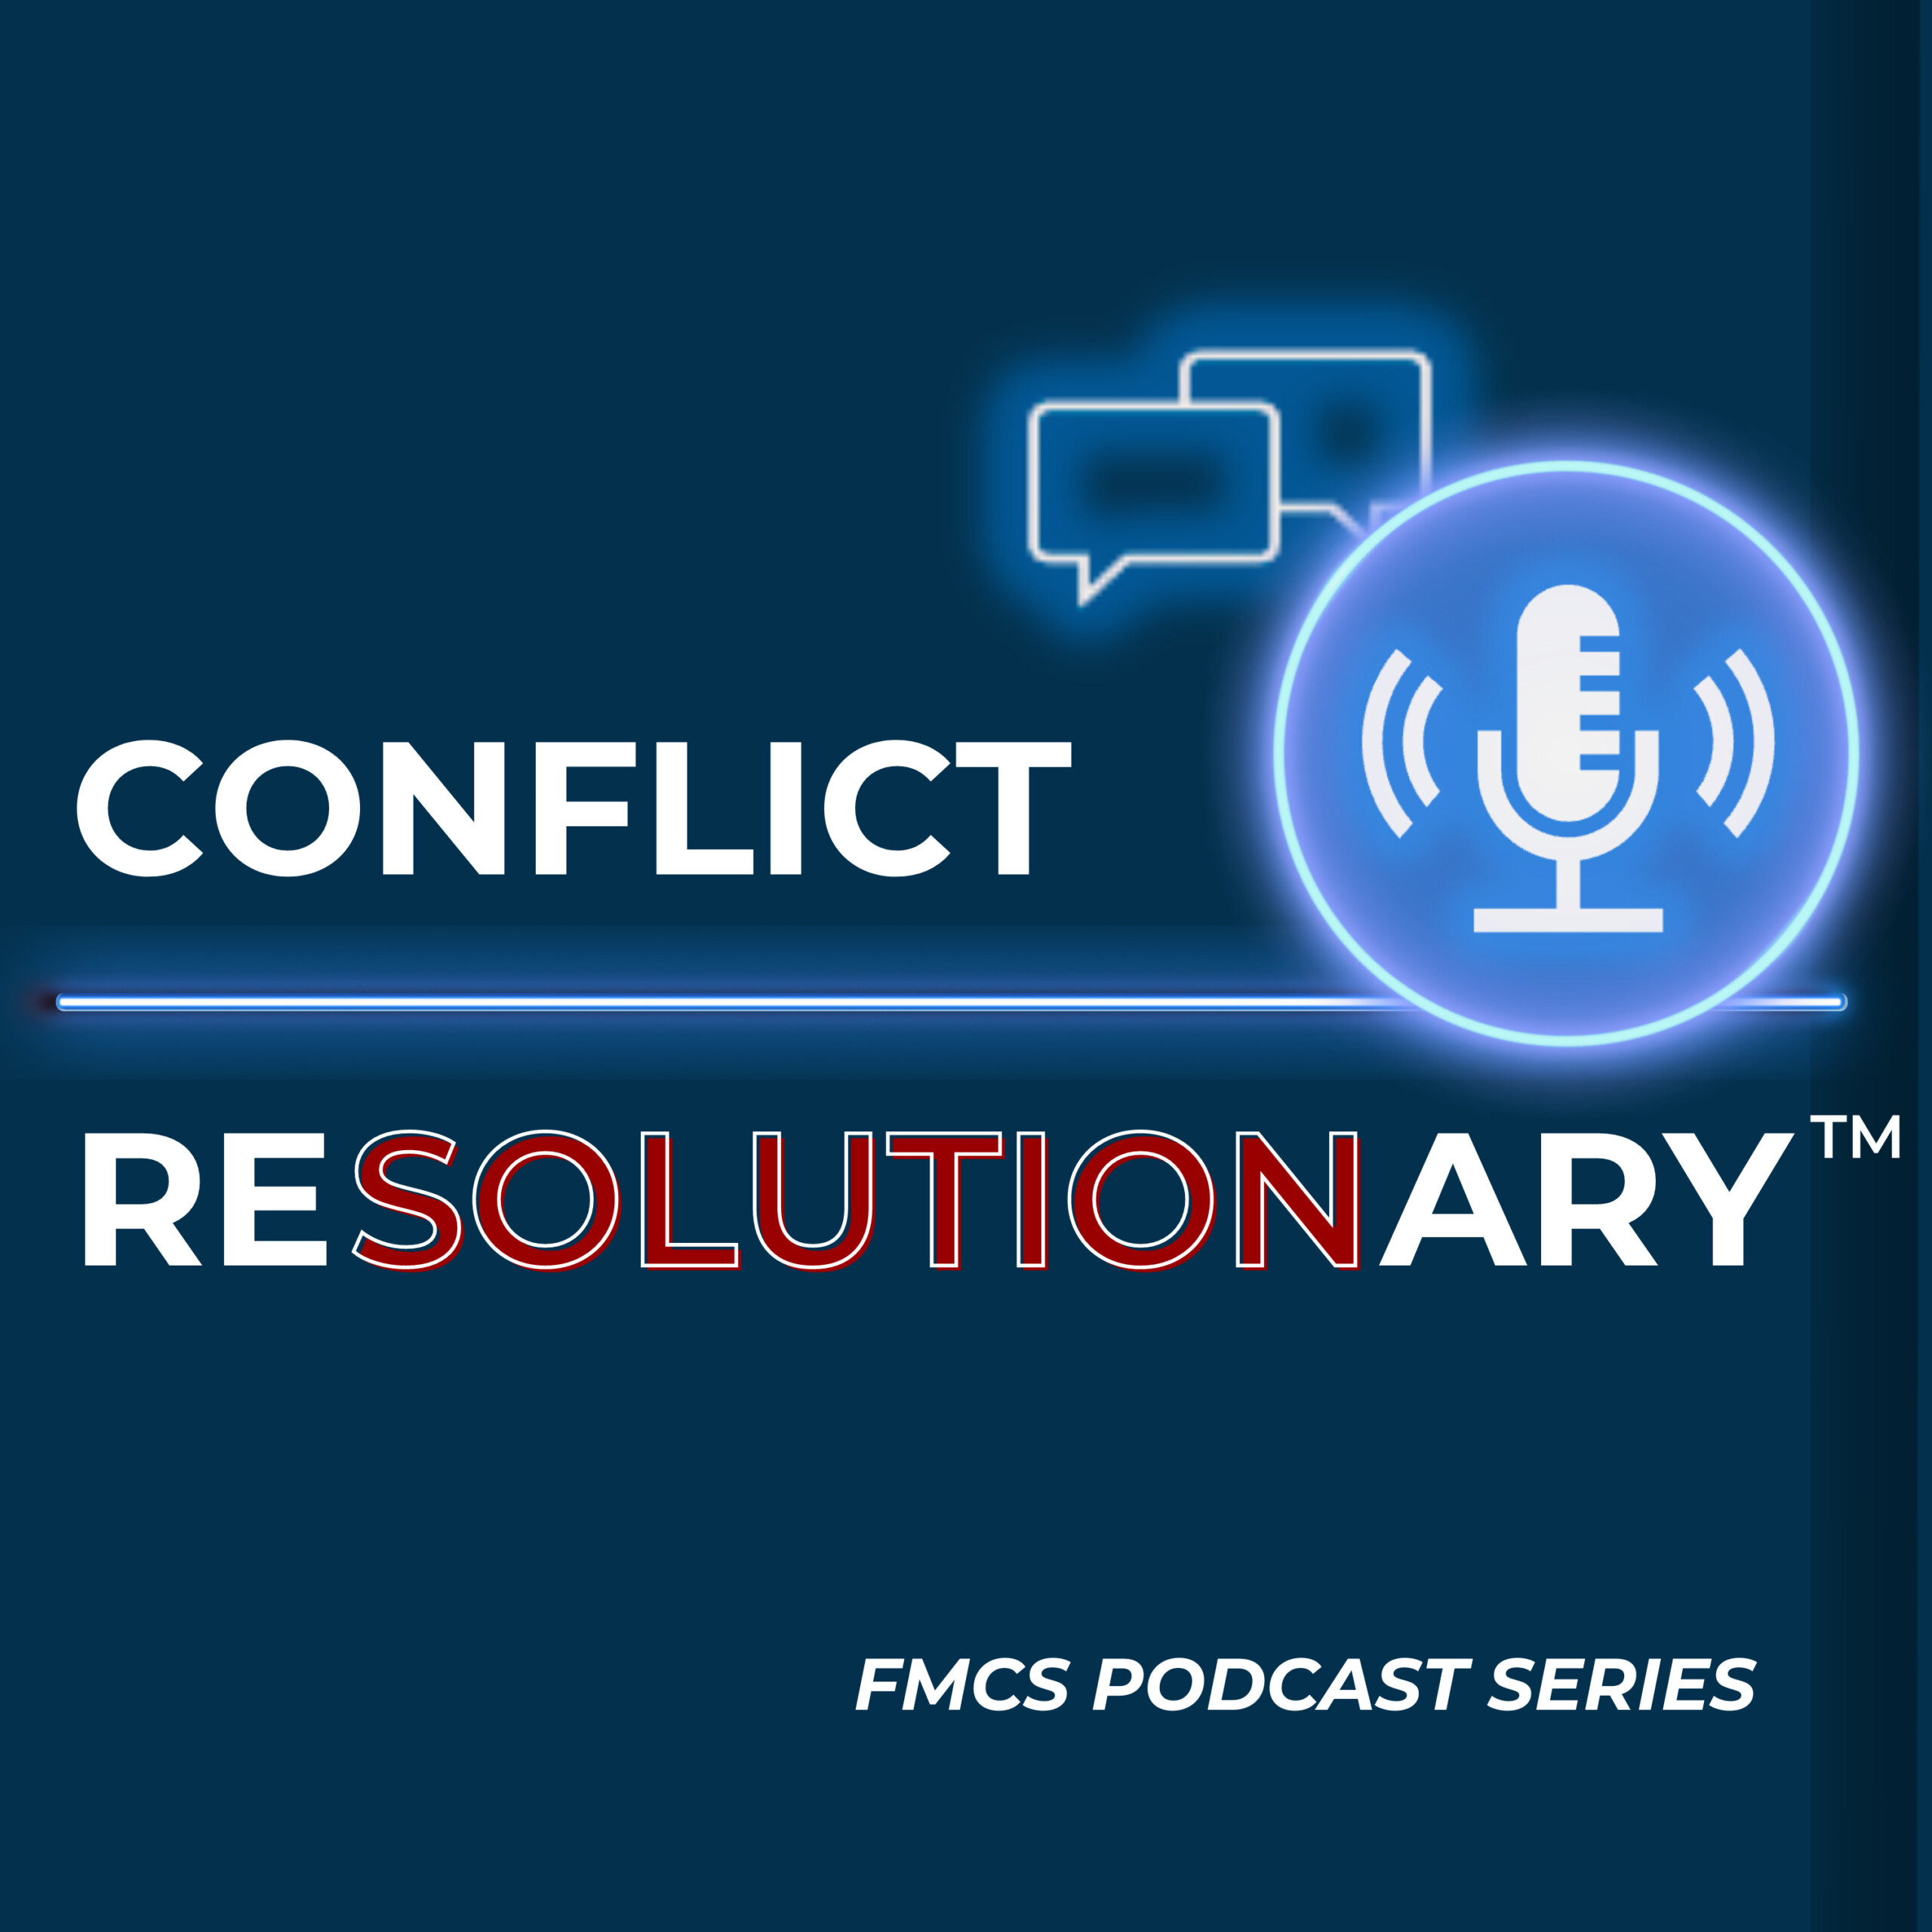 Learn About The Podcast Federal Mediation And Conciliation Service